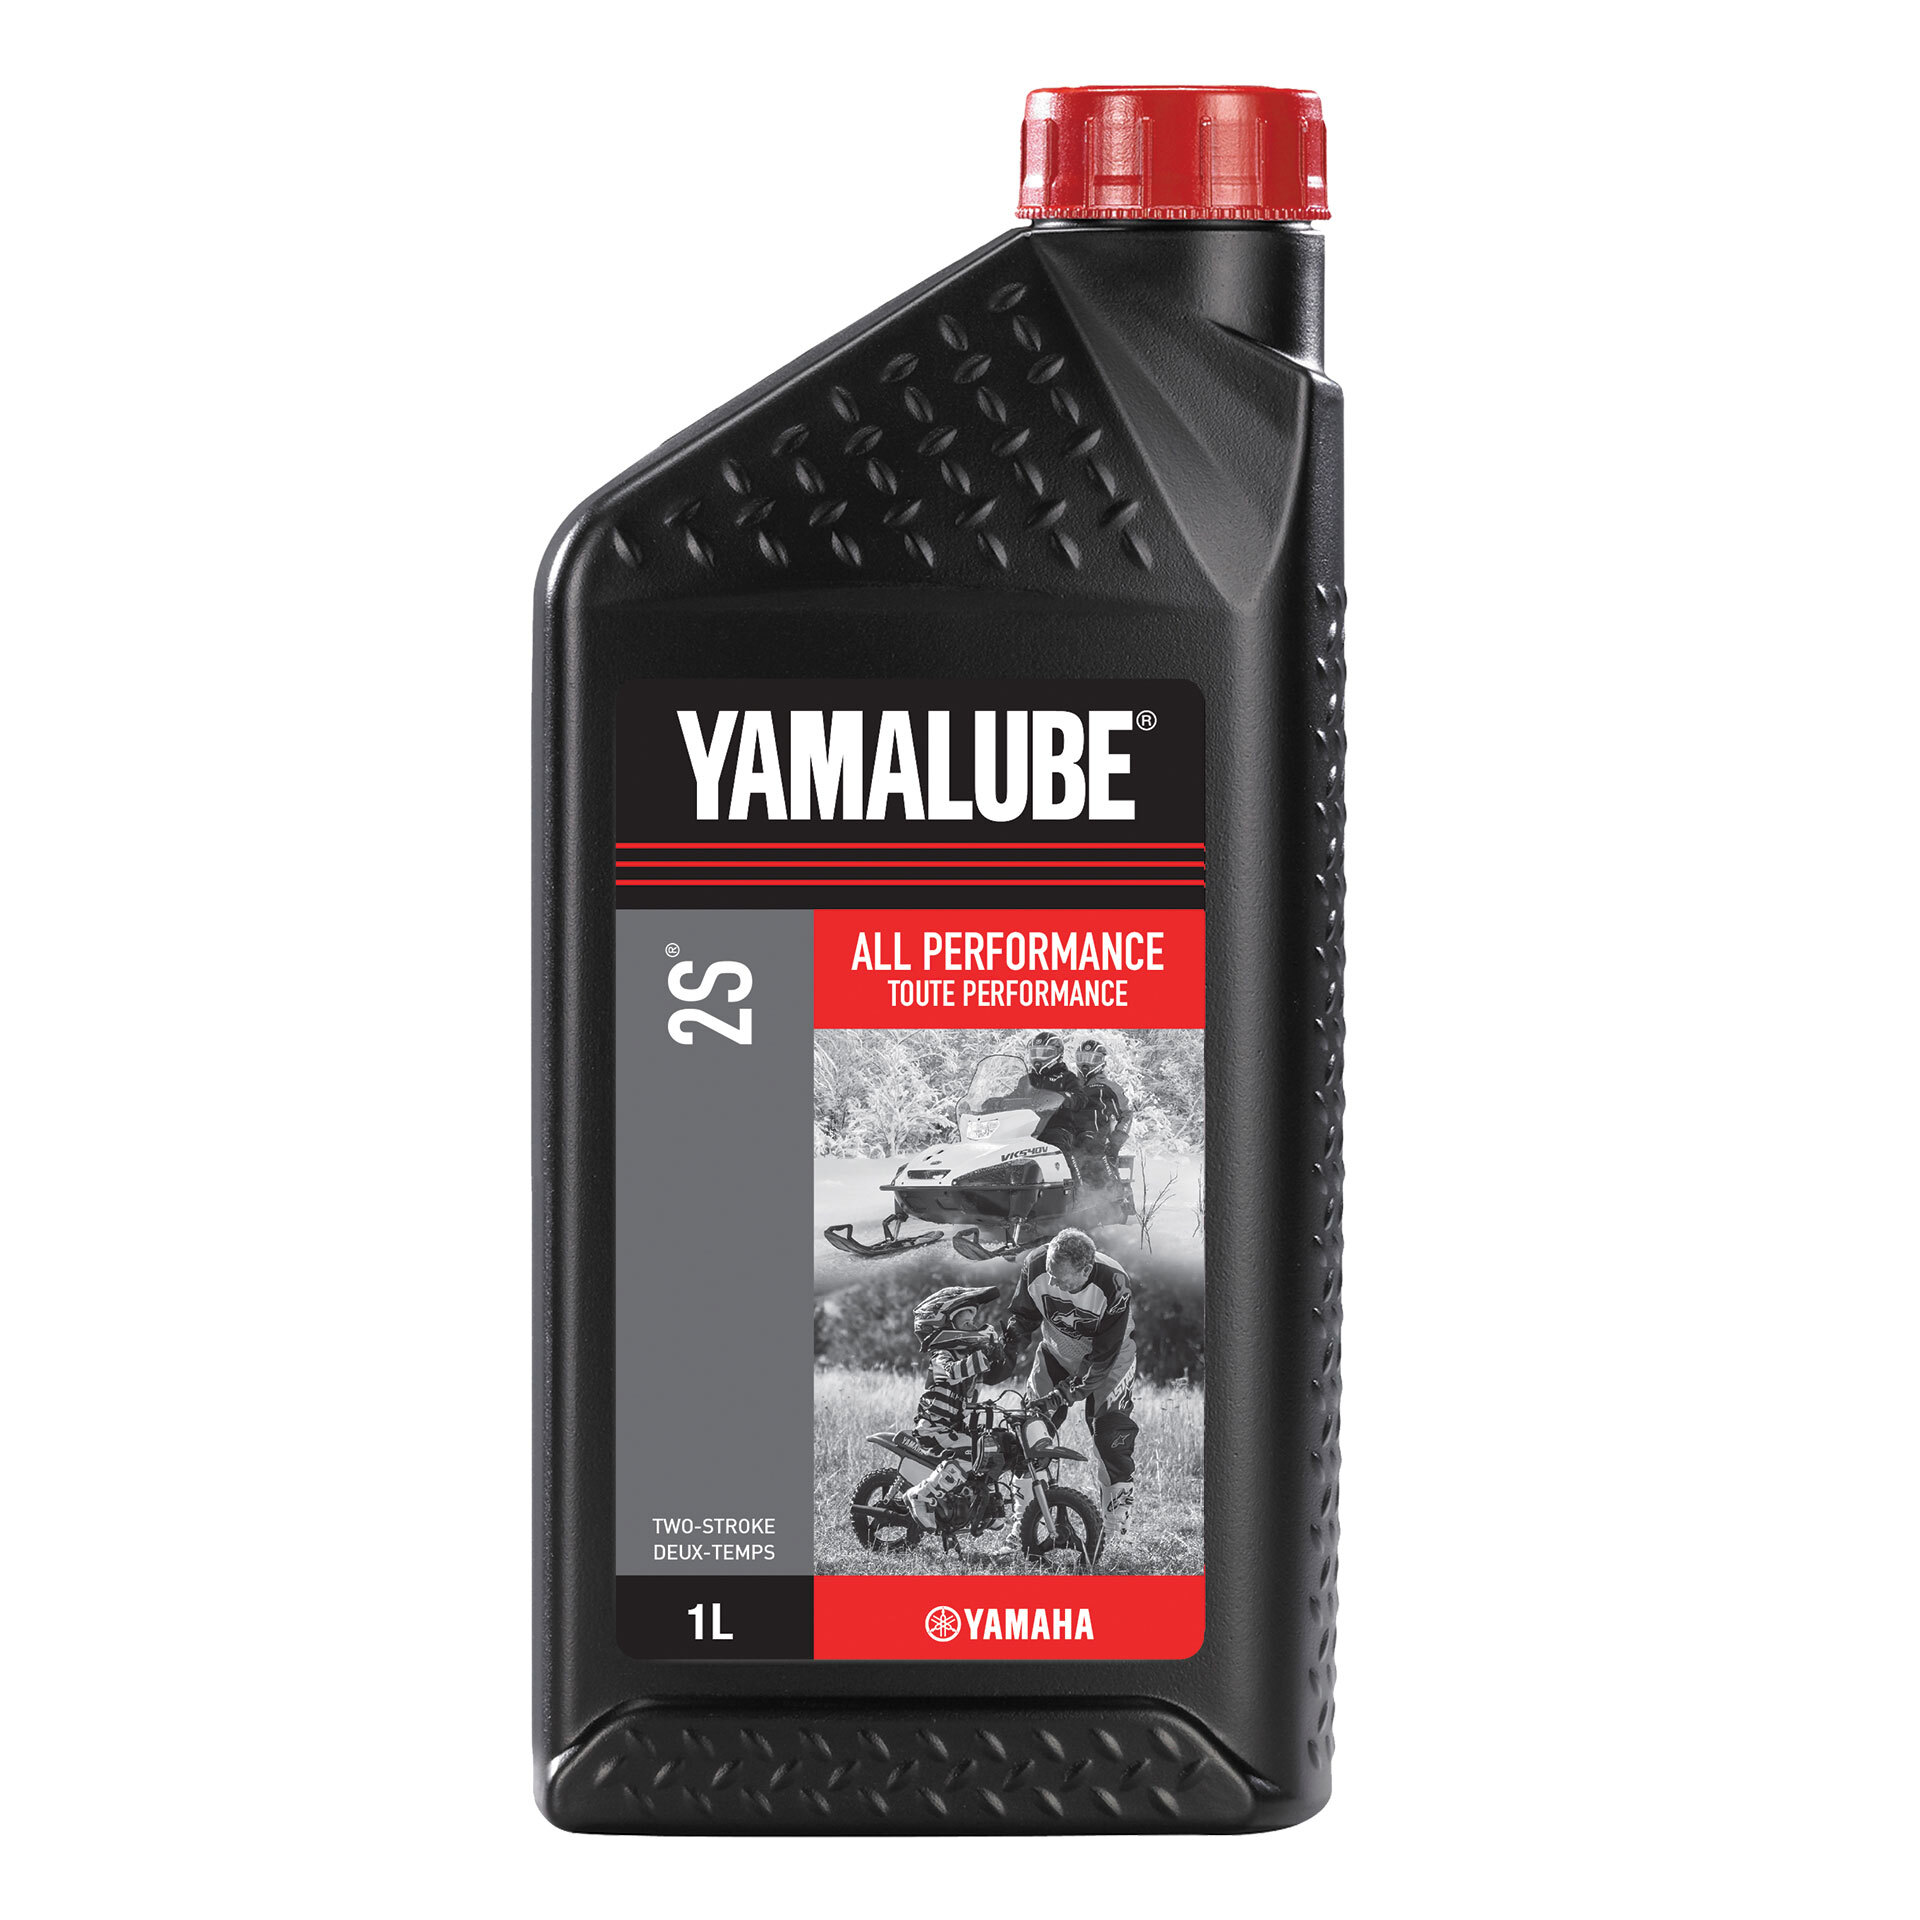 All Performance 2S Two Stroke Engine Oil